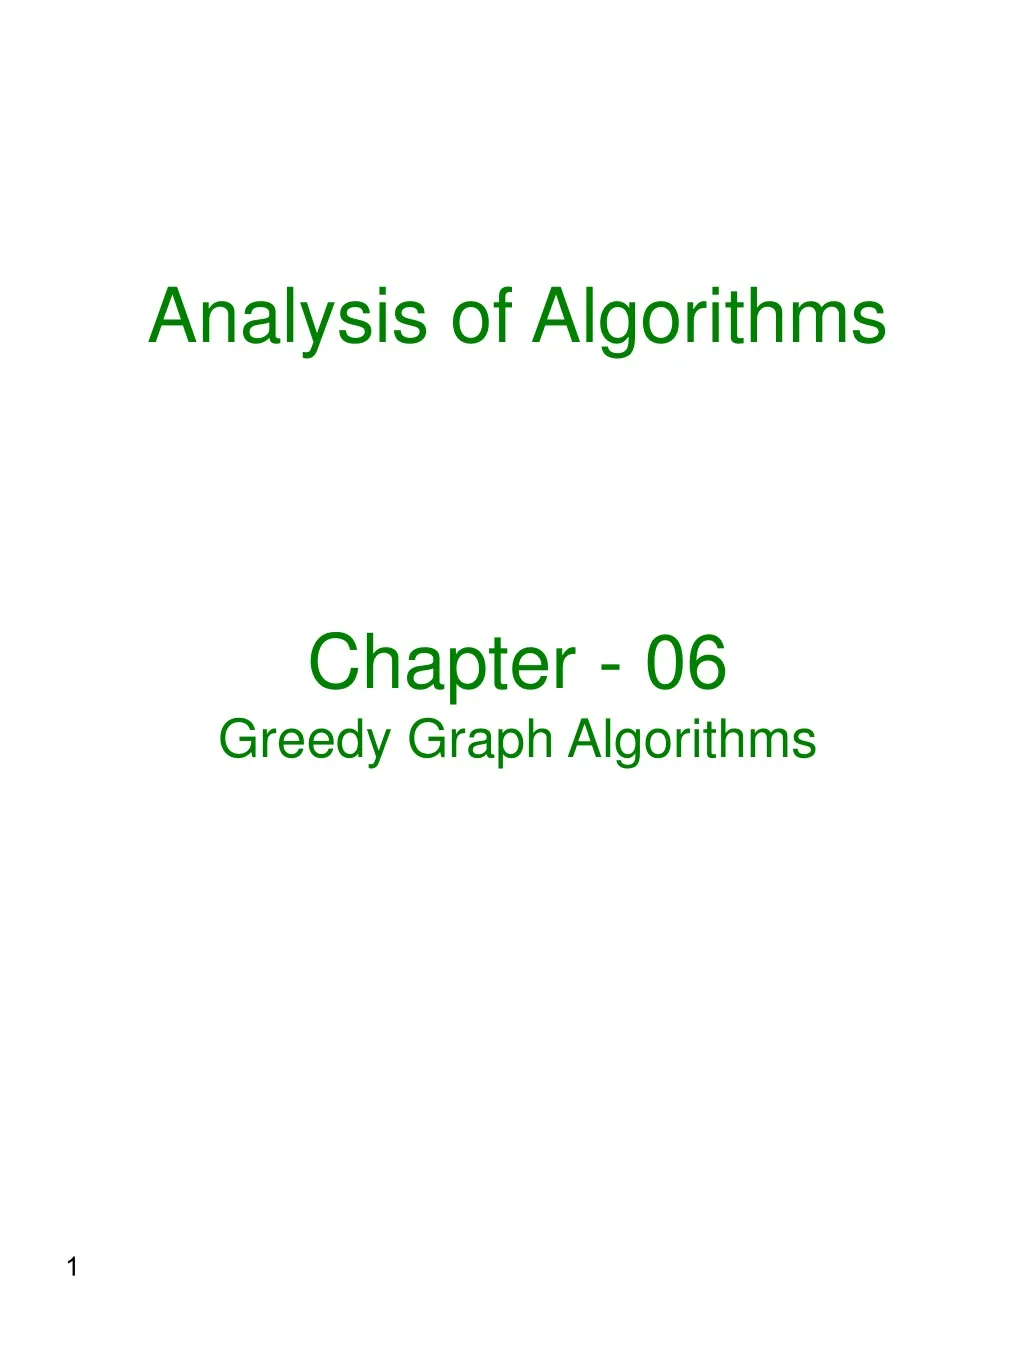 analysis of algorithms chapter 06 greedy graph